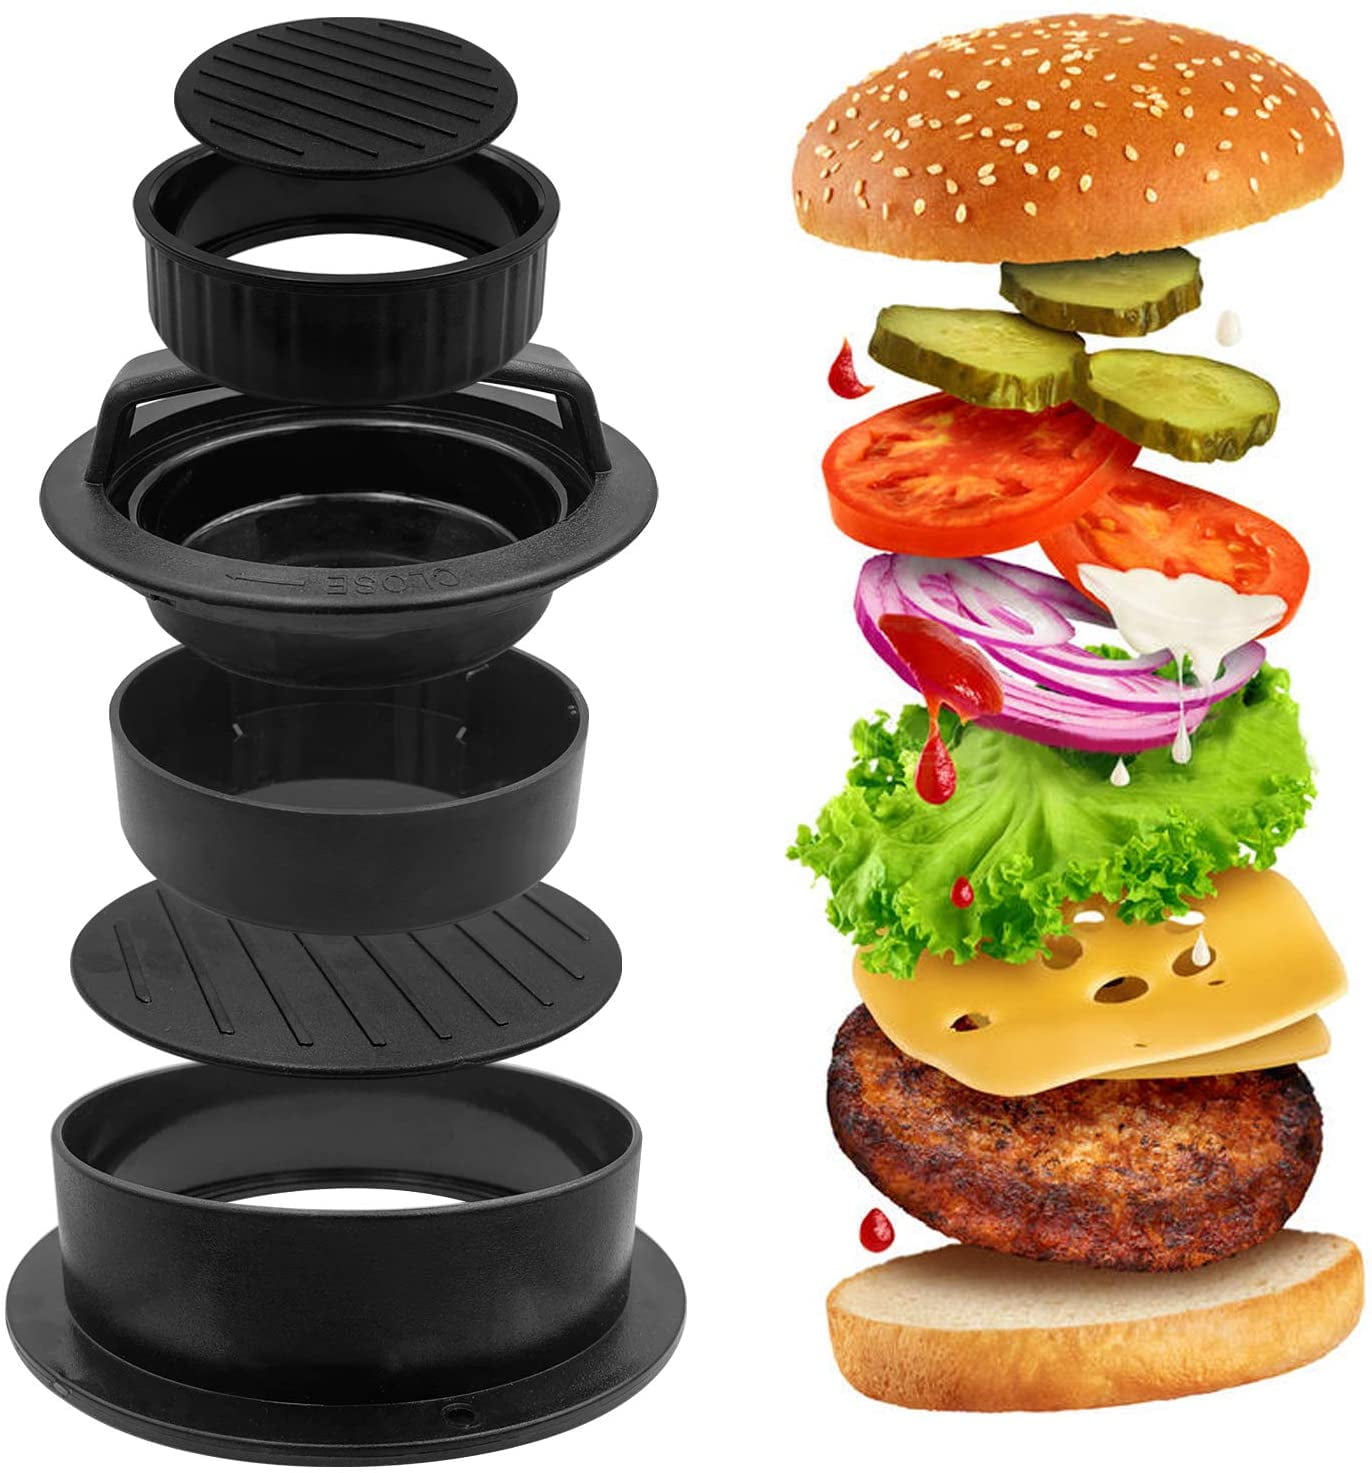 Non Stick Hamburger Mold Kit for Easily Making Delicious Stuffed Burgers Stainless Steel Burger Press Beef Patties Hamburger Press Hamburger Patty Maker